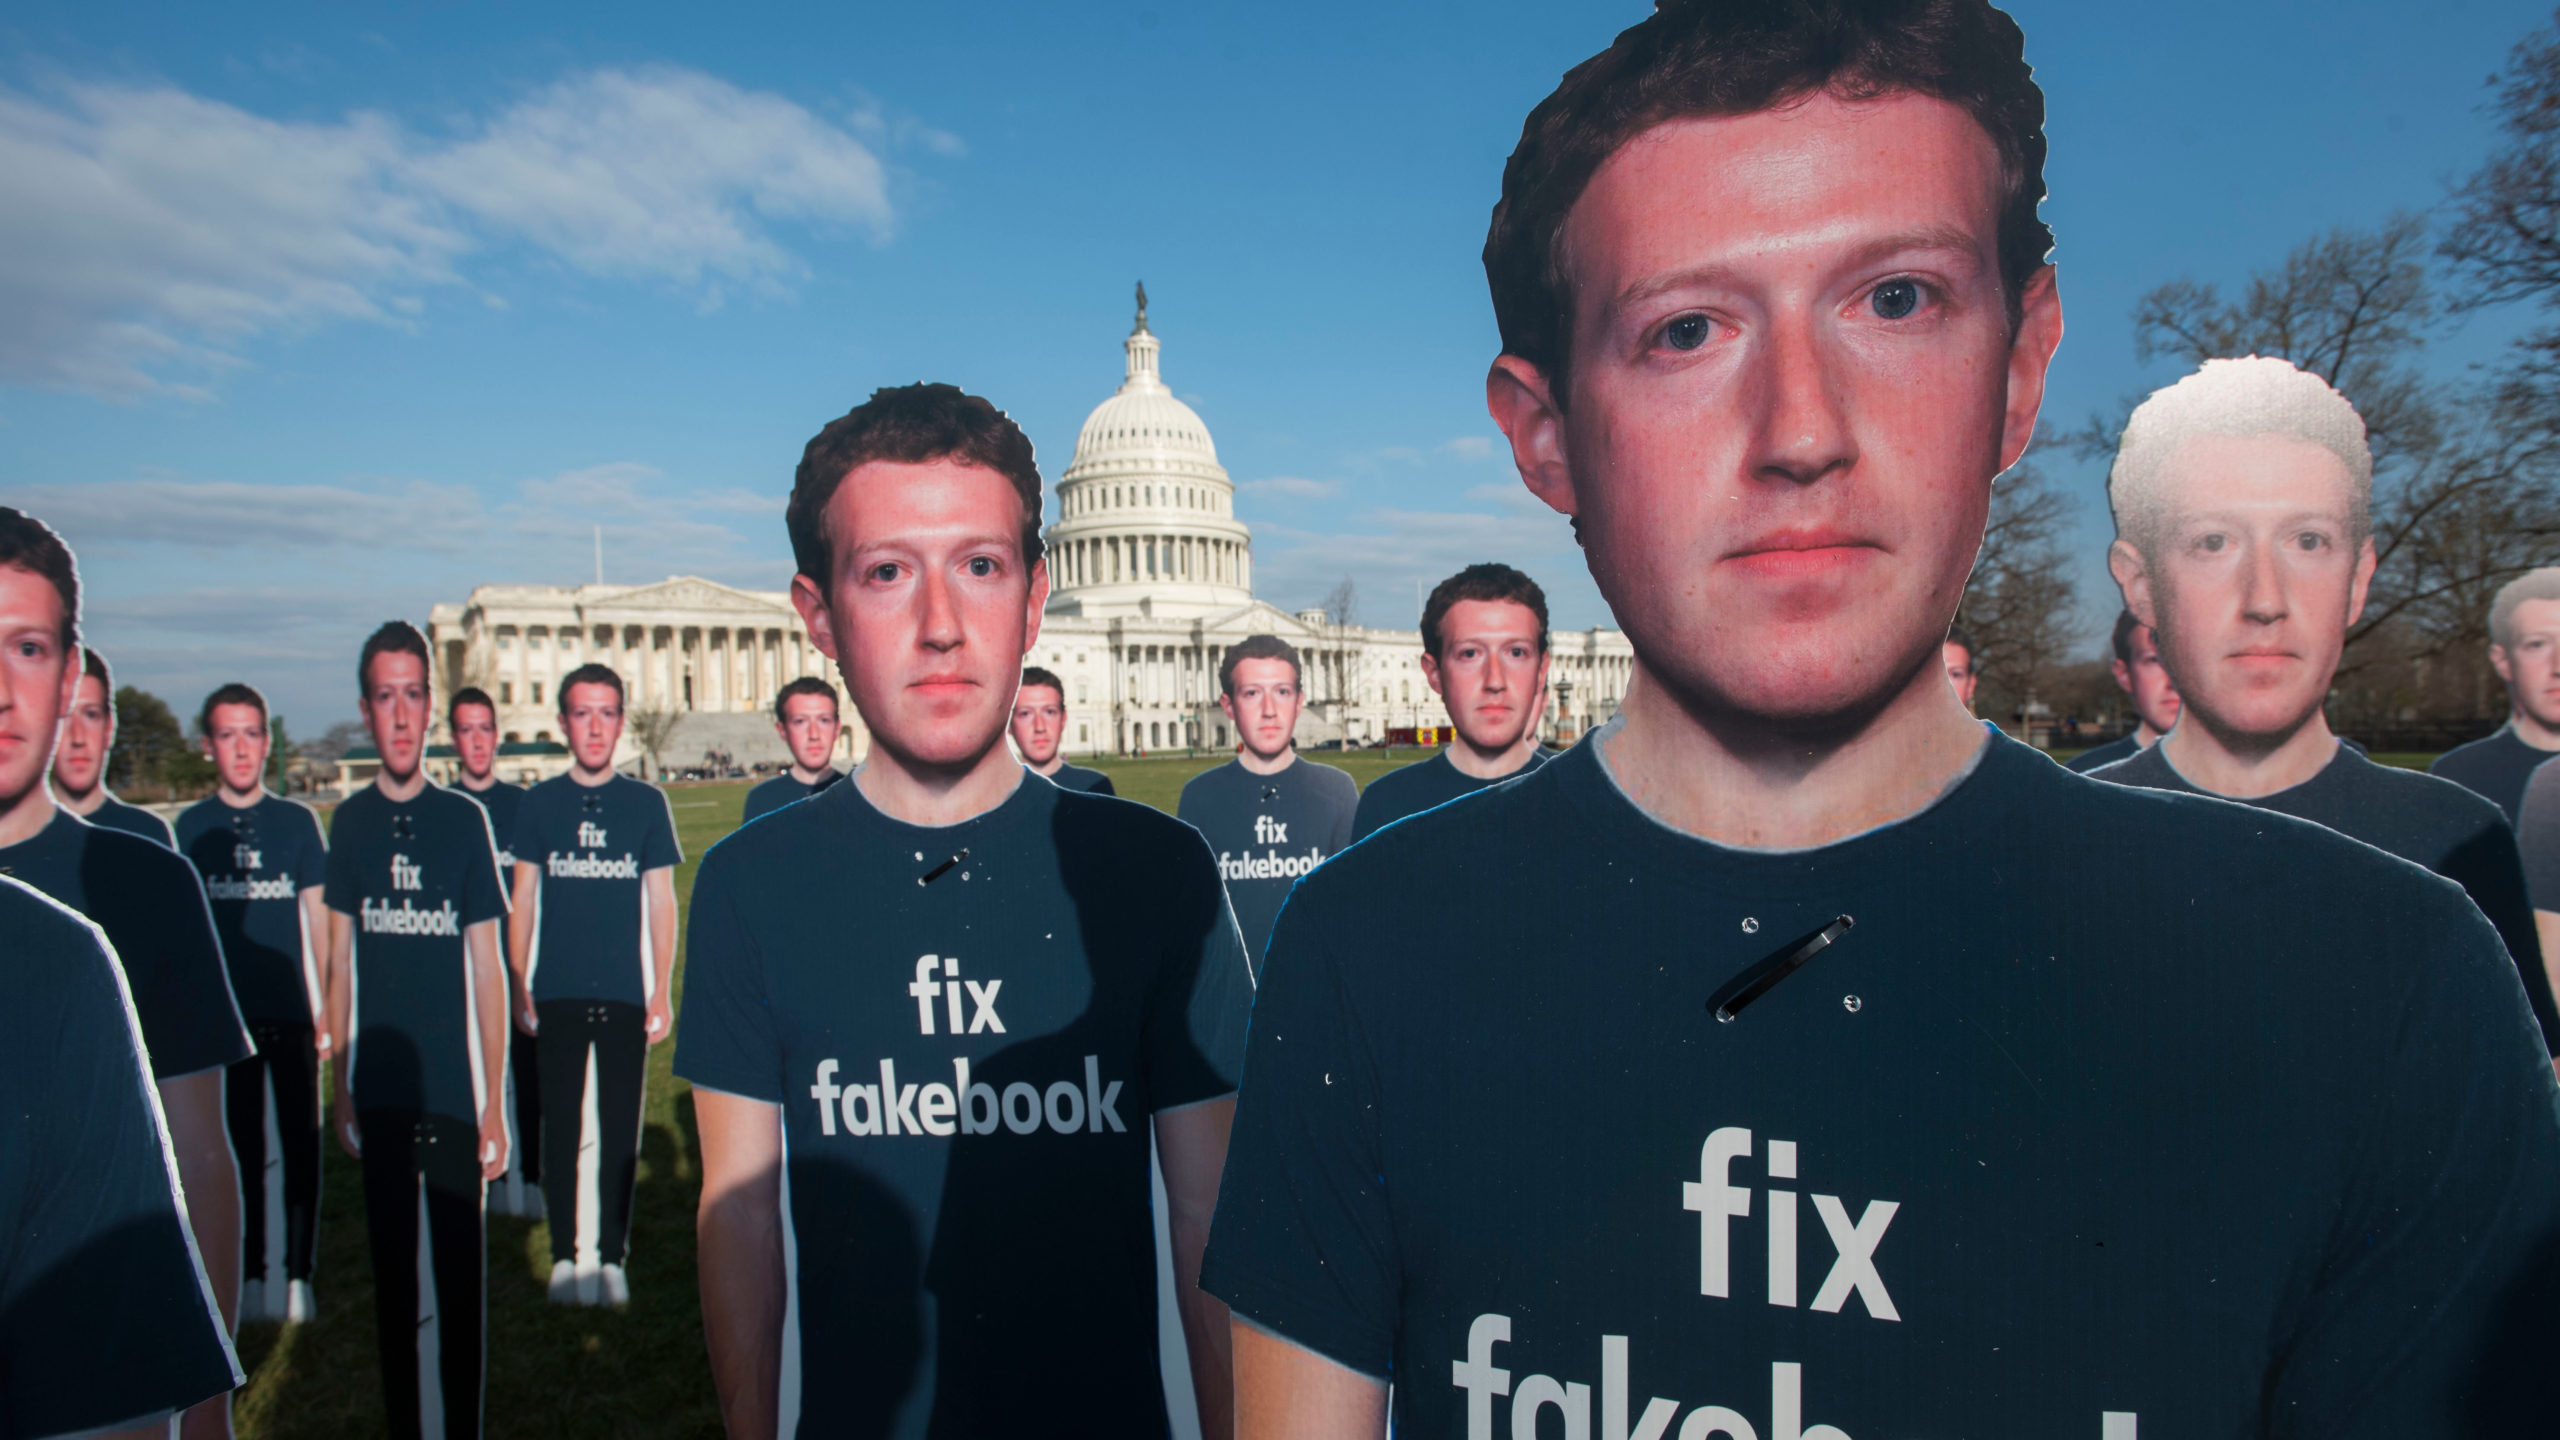 Army Of Cardboard Mark Zuckerbergs Mock Facebook CEO From Capitol Lawn